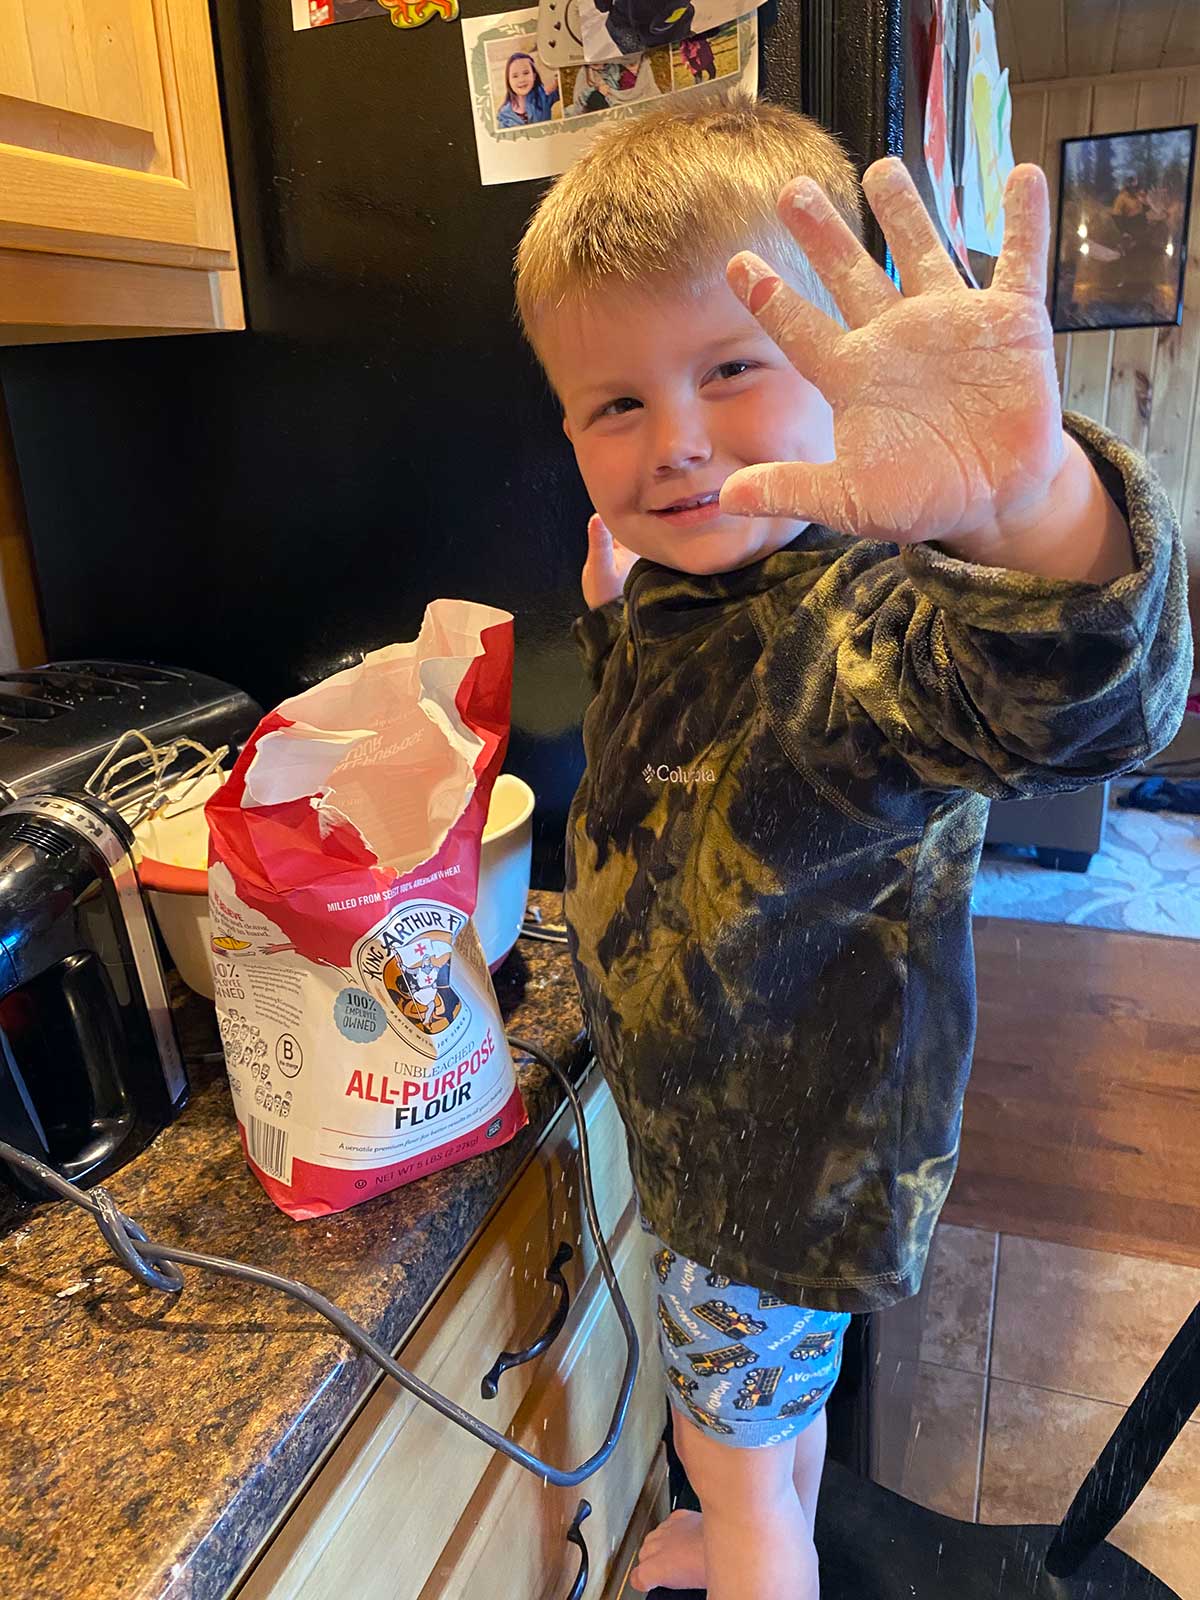 A child with a bag of King Arthur Flour in the kitchen holding out a flour-covered hand